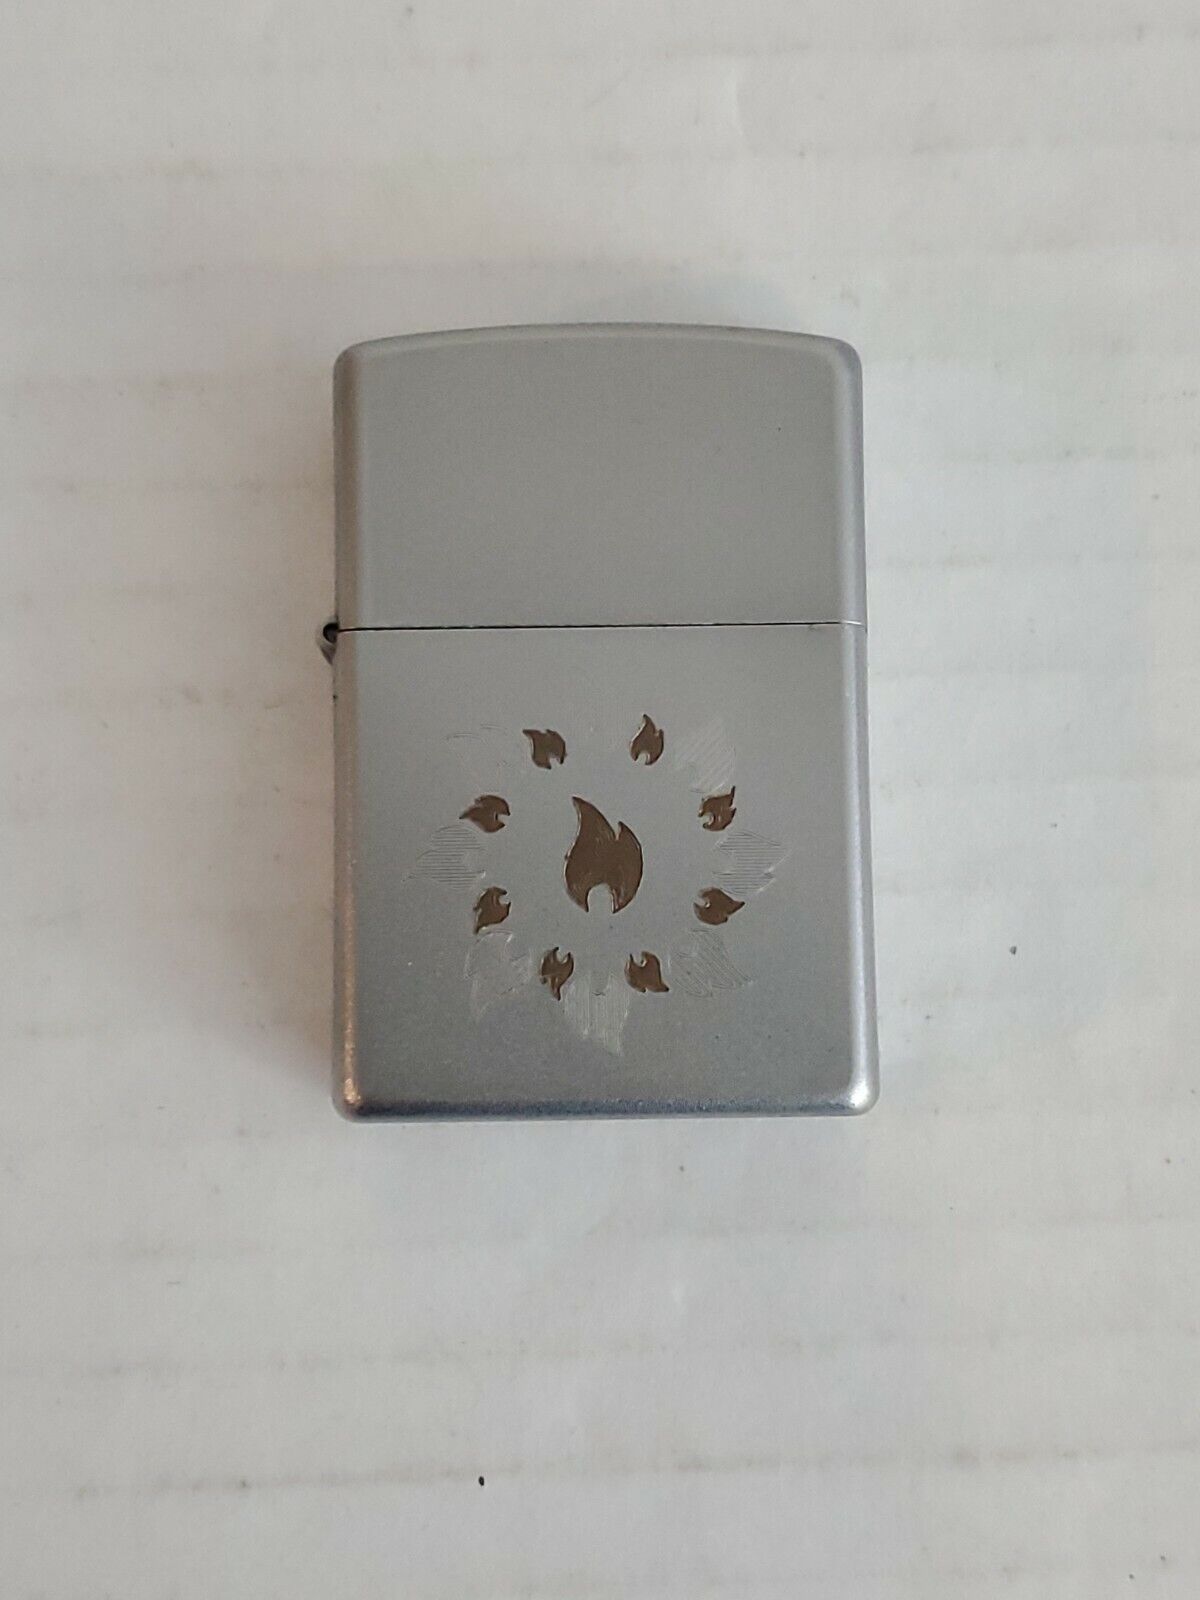 VINTAGE ZIPPO FLAME JEWISH STAR LIGHTER MADE IN USA  SILVER  J 11